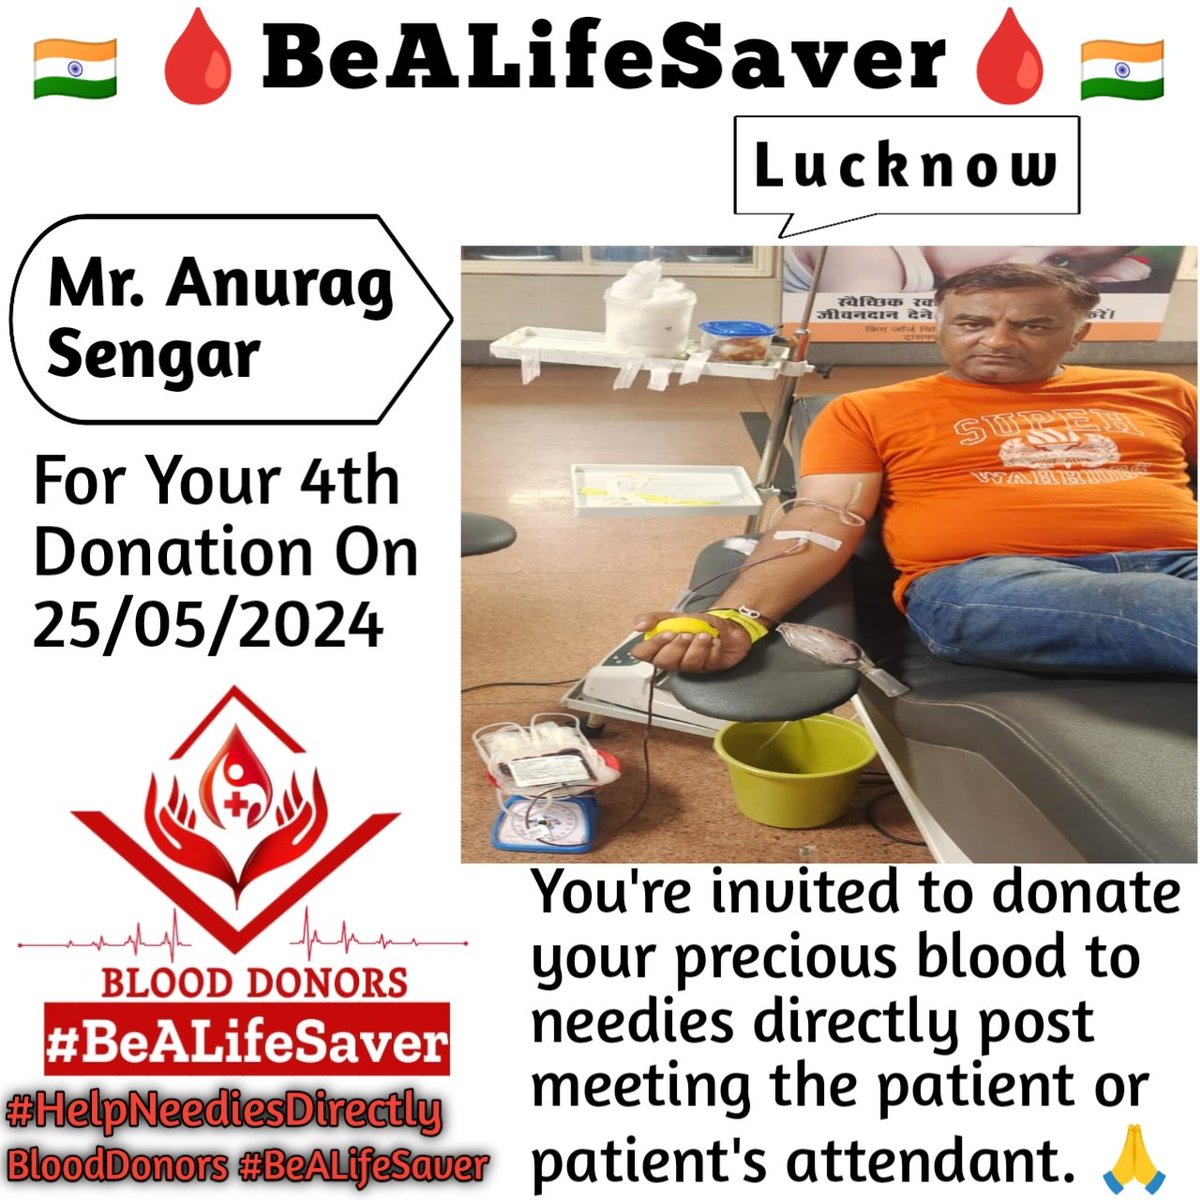 Lucknow BeALifeSaver Kudos_Mr_Anurag_Sengar_Ji #HelpNeediesDirectly Today's hero Mr. Anurag_Sengar Ji donated blood in Lucknow for the 4th Time for one of the needies. Heartfelt Gratitude and Respect to Anurag Sengar Ji for his blood donation for Patient admitted in Lucknow.